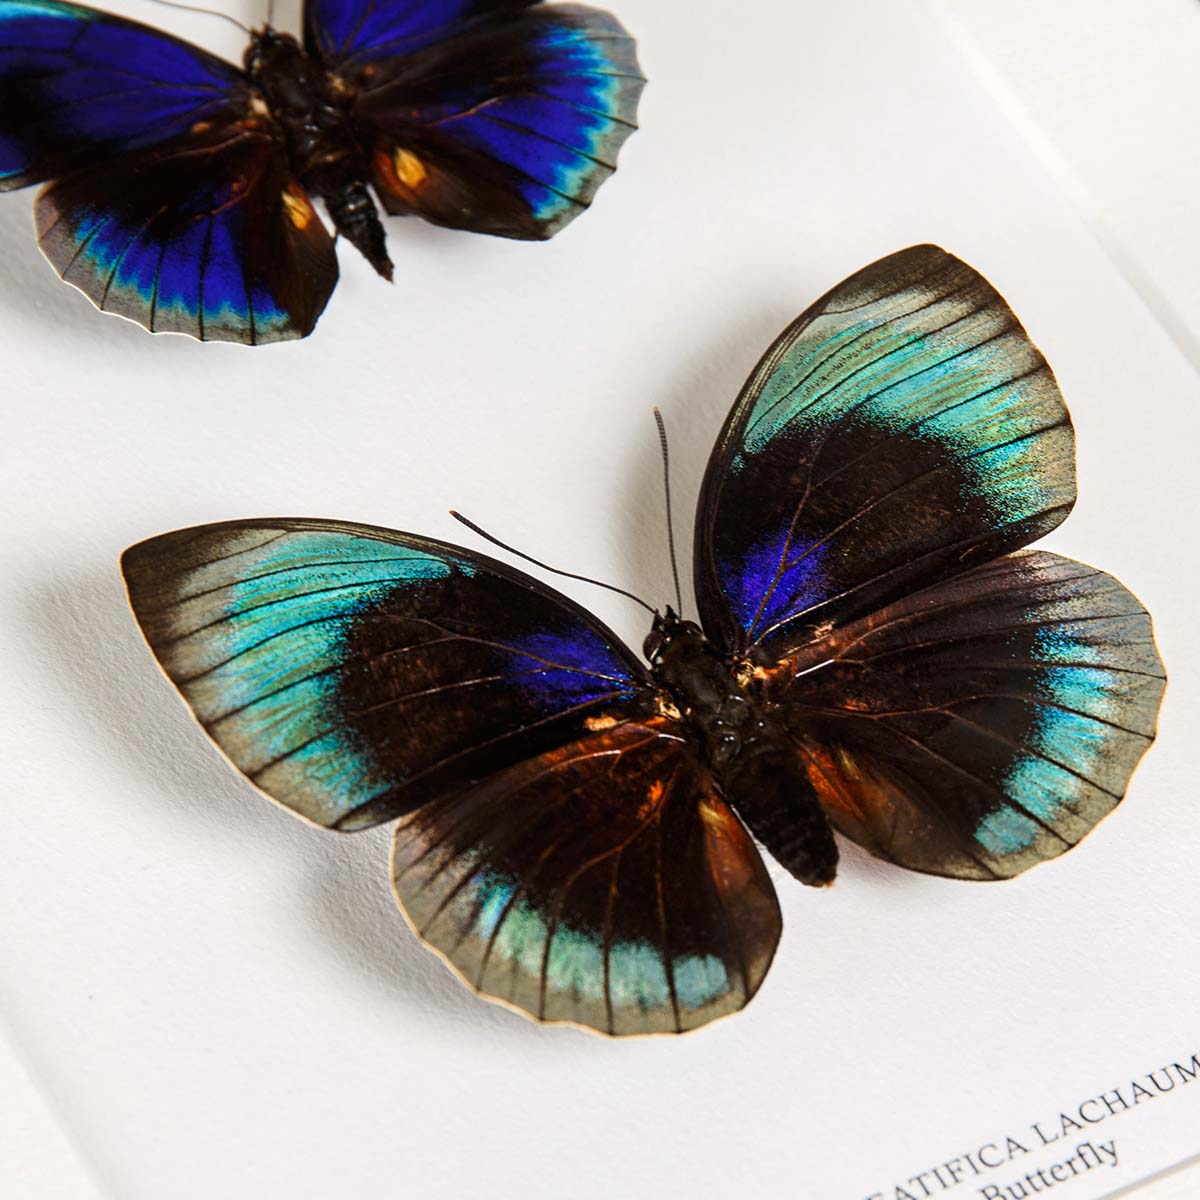 Agrias Butterfly Male & Female Pair In Box Frame (Agrias beatifica lachaume)